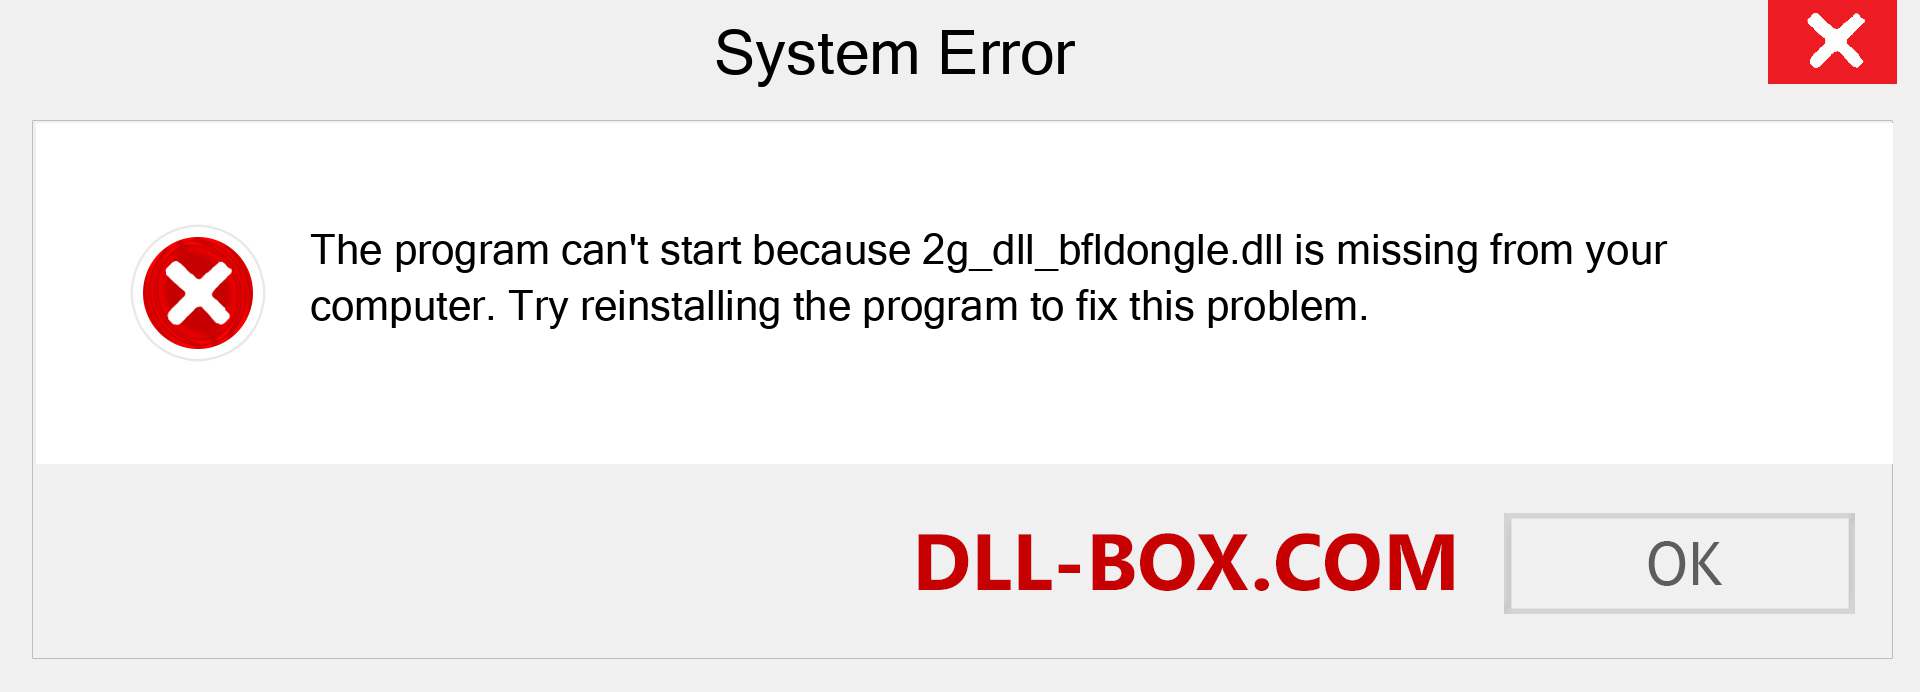  2g_dll_bfldongle.dll file is missing?. Download for Windows 7, 8, 10 - Fix  2g_dll_bfldongle dll Missing Error on Windows, photos, images